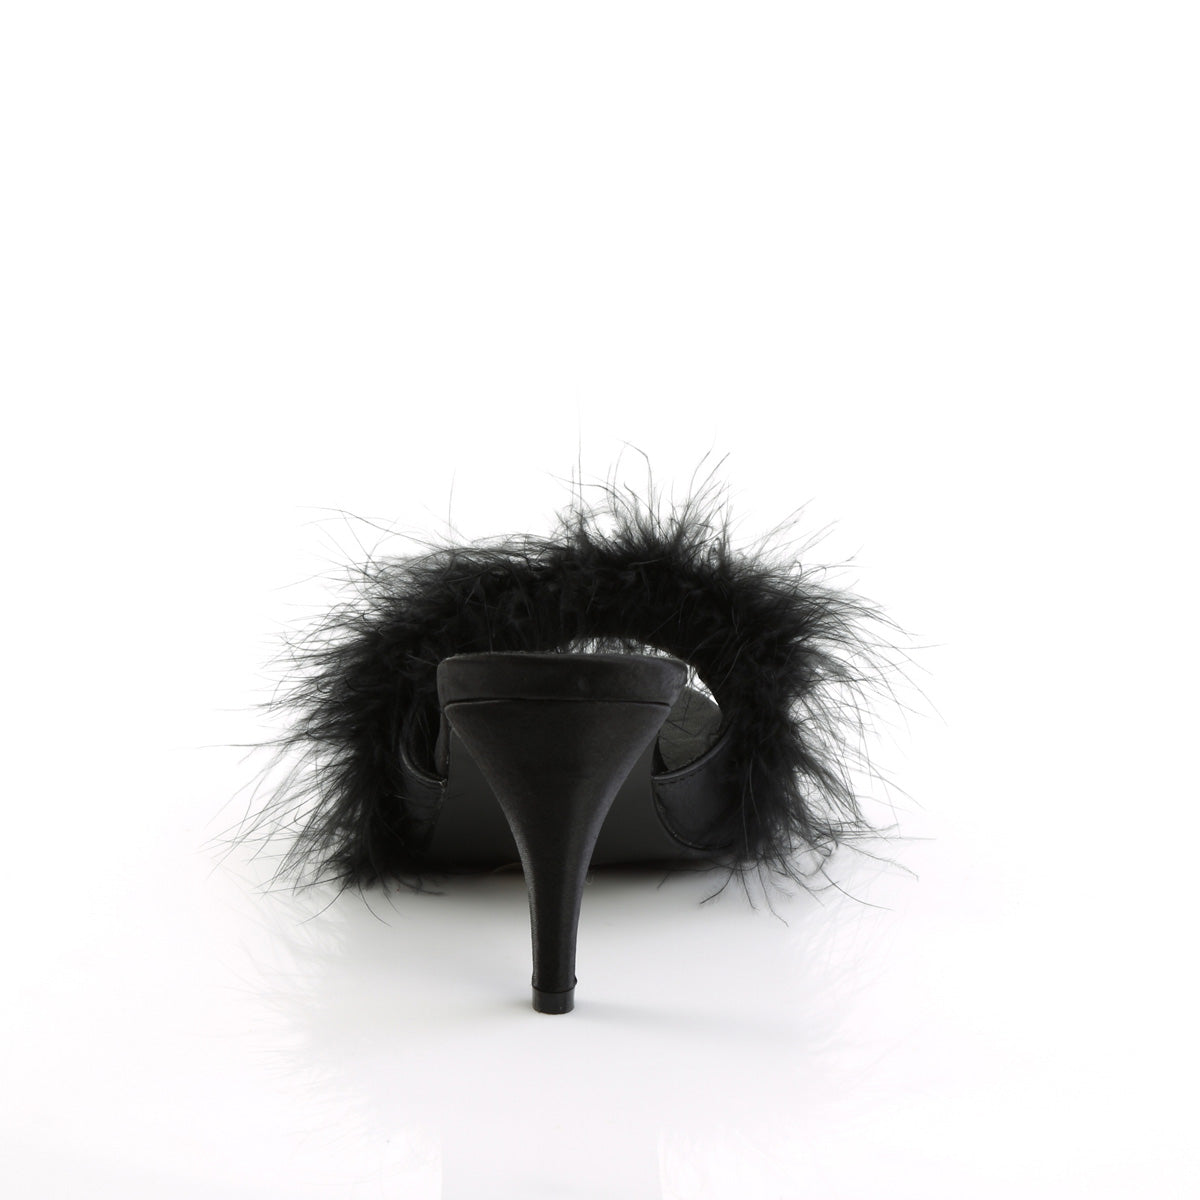 AMOUR-03 Fabulicious 3 Inch Heel Black Marabou Sexy Shoes-Fabulicious- Sexy Shoes Fetish Footwear